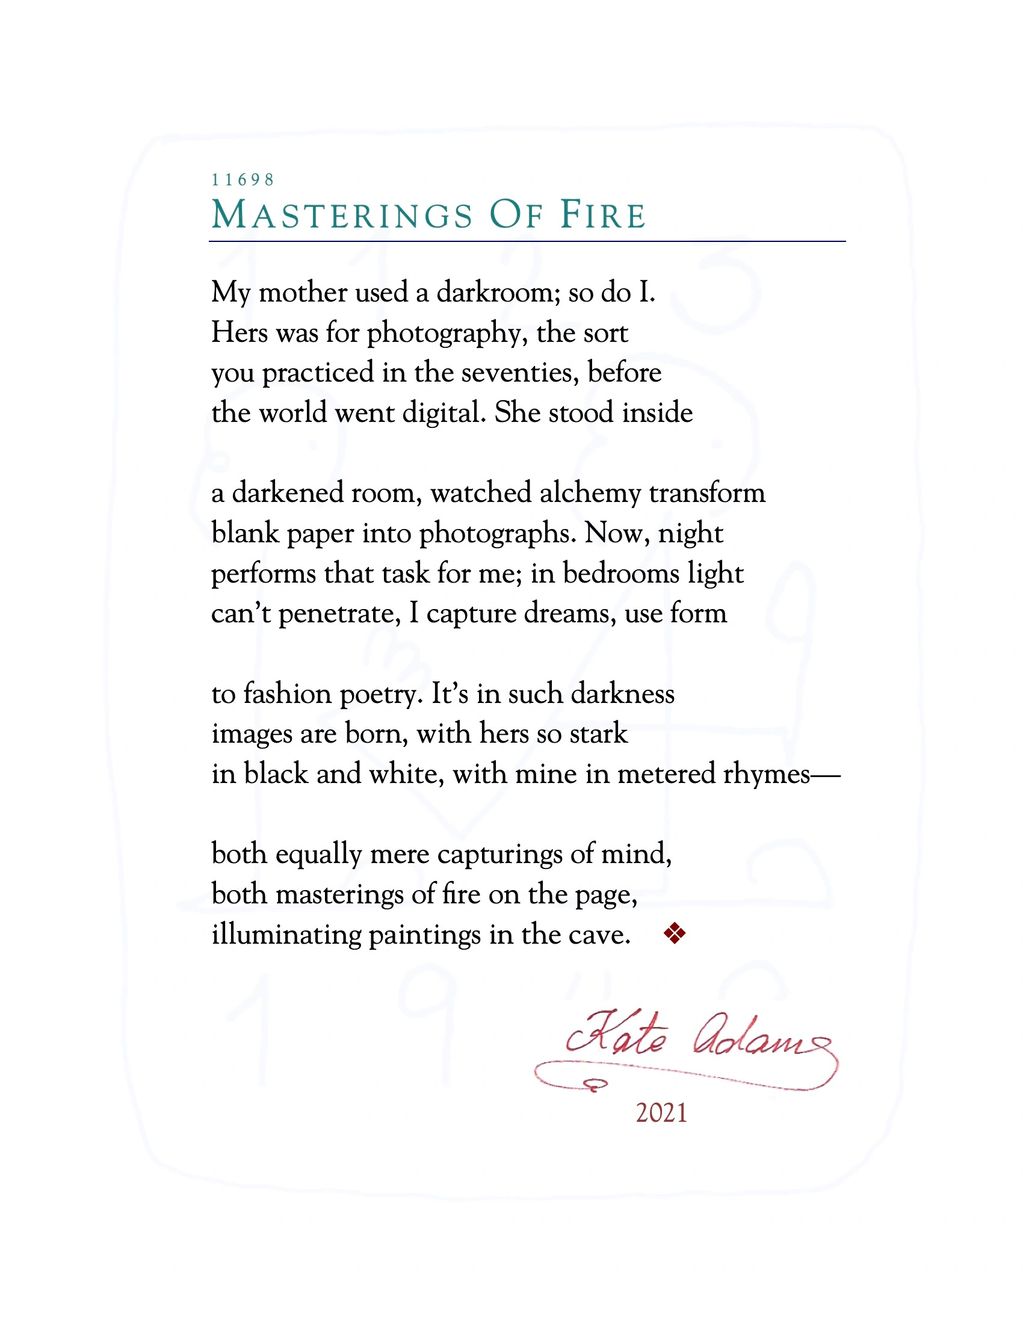 PDF of poem "Masterings Of Fire"

darkroom, paintings, cave, photography